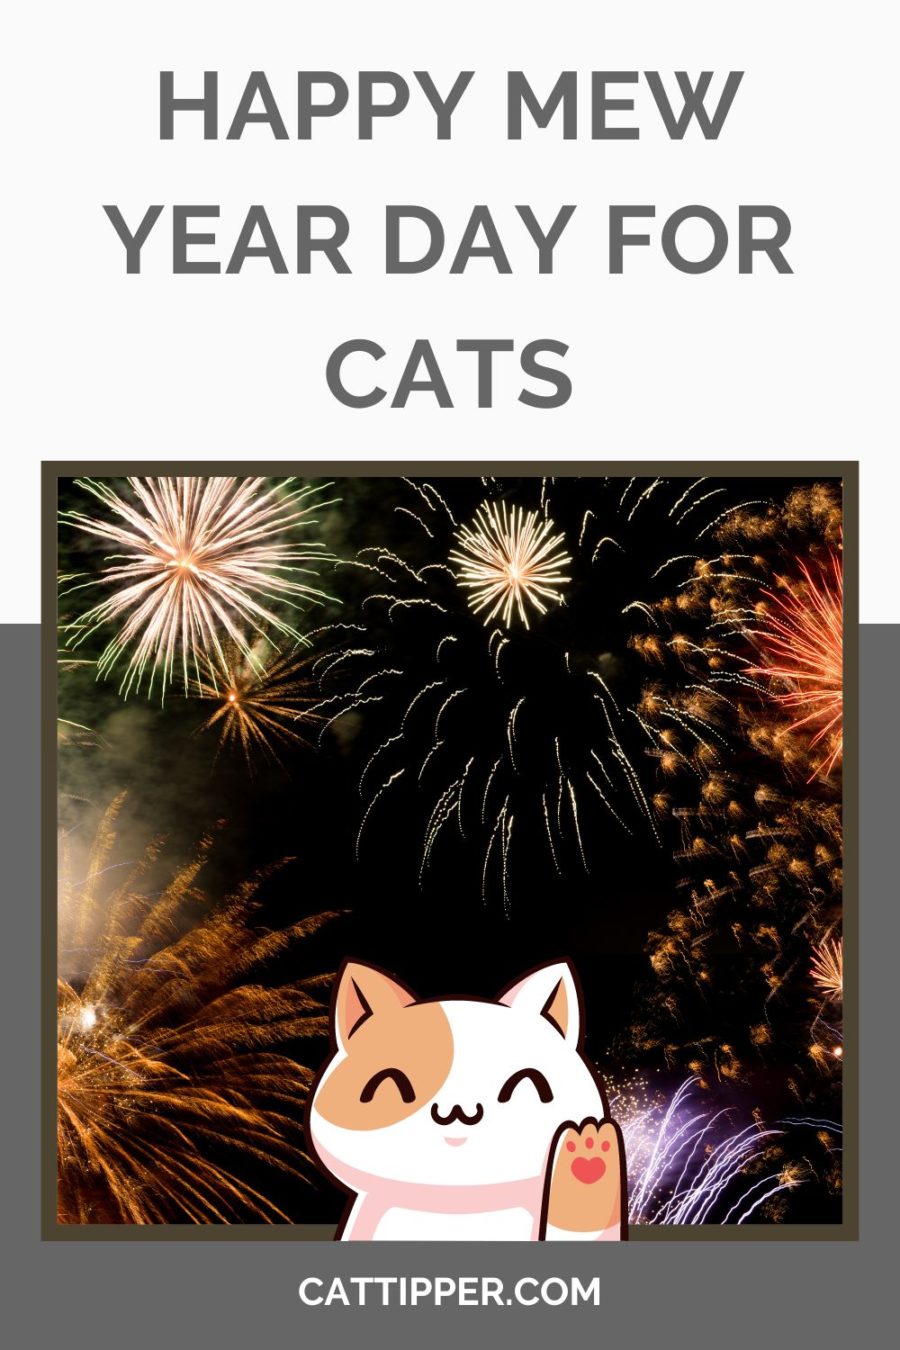 Happy Mew Year For Cats Day - January 2